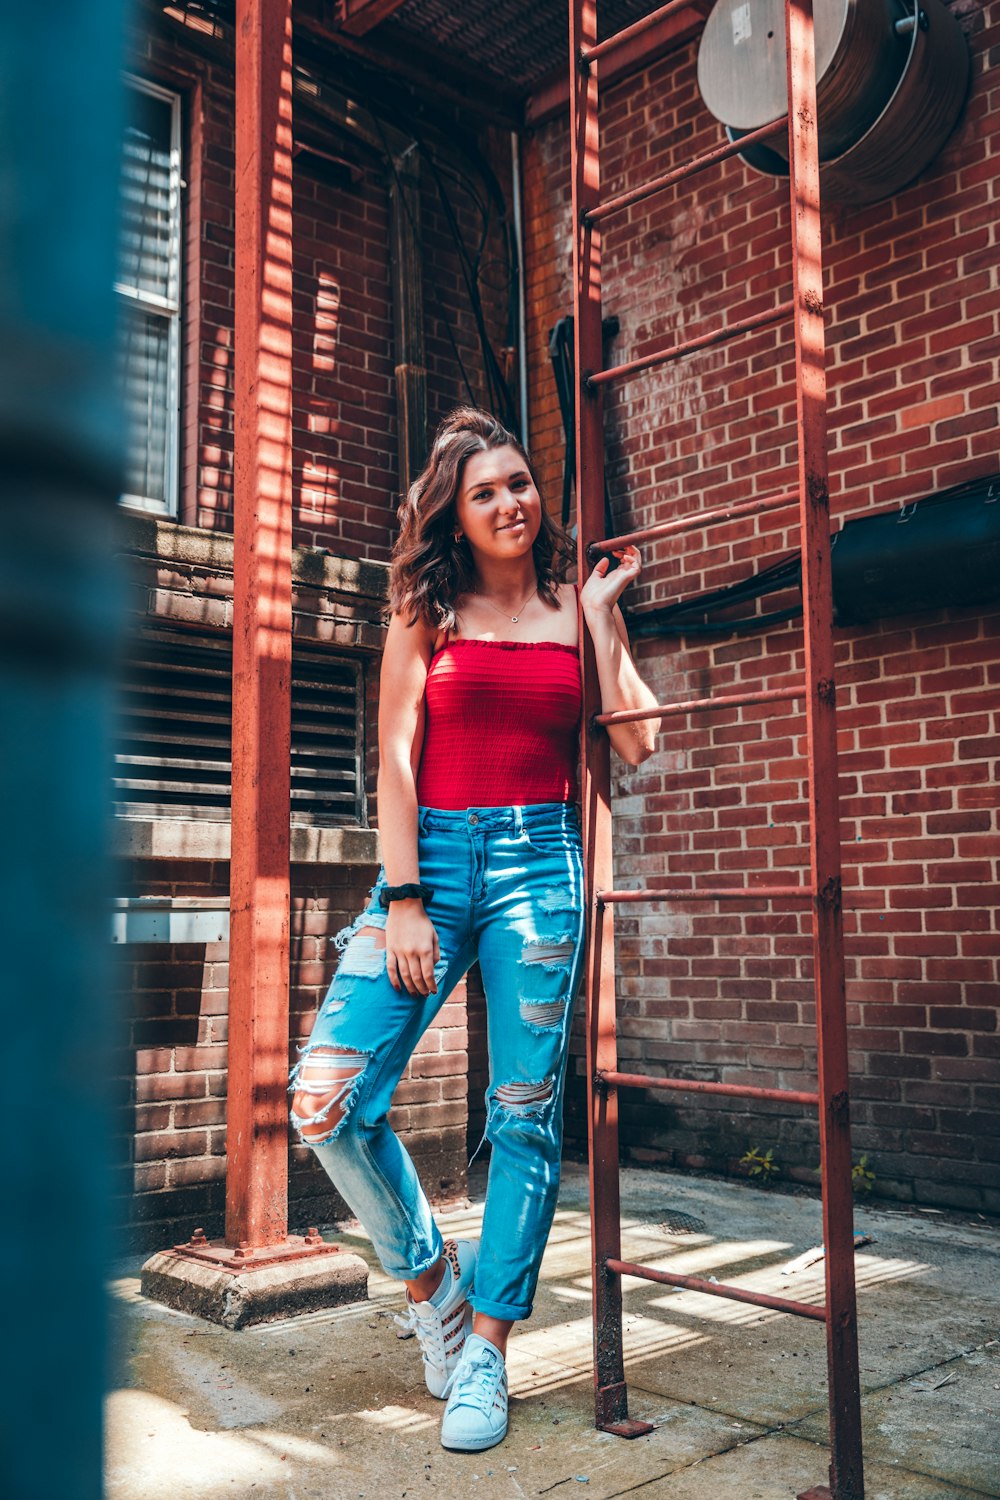 Standing woman in red shirt and blue denim jeans holding onto ladder photo  – Free Apparel Image on Unsplash